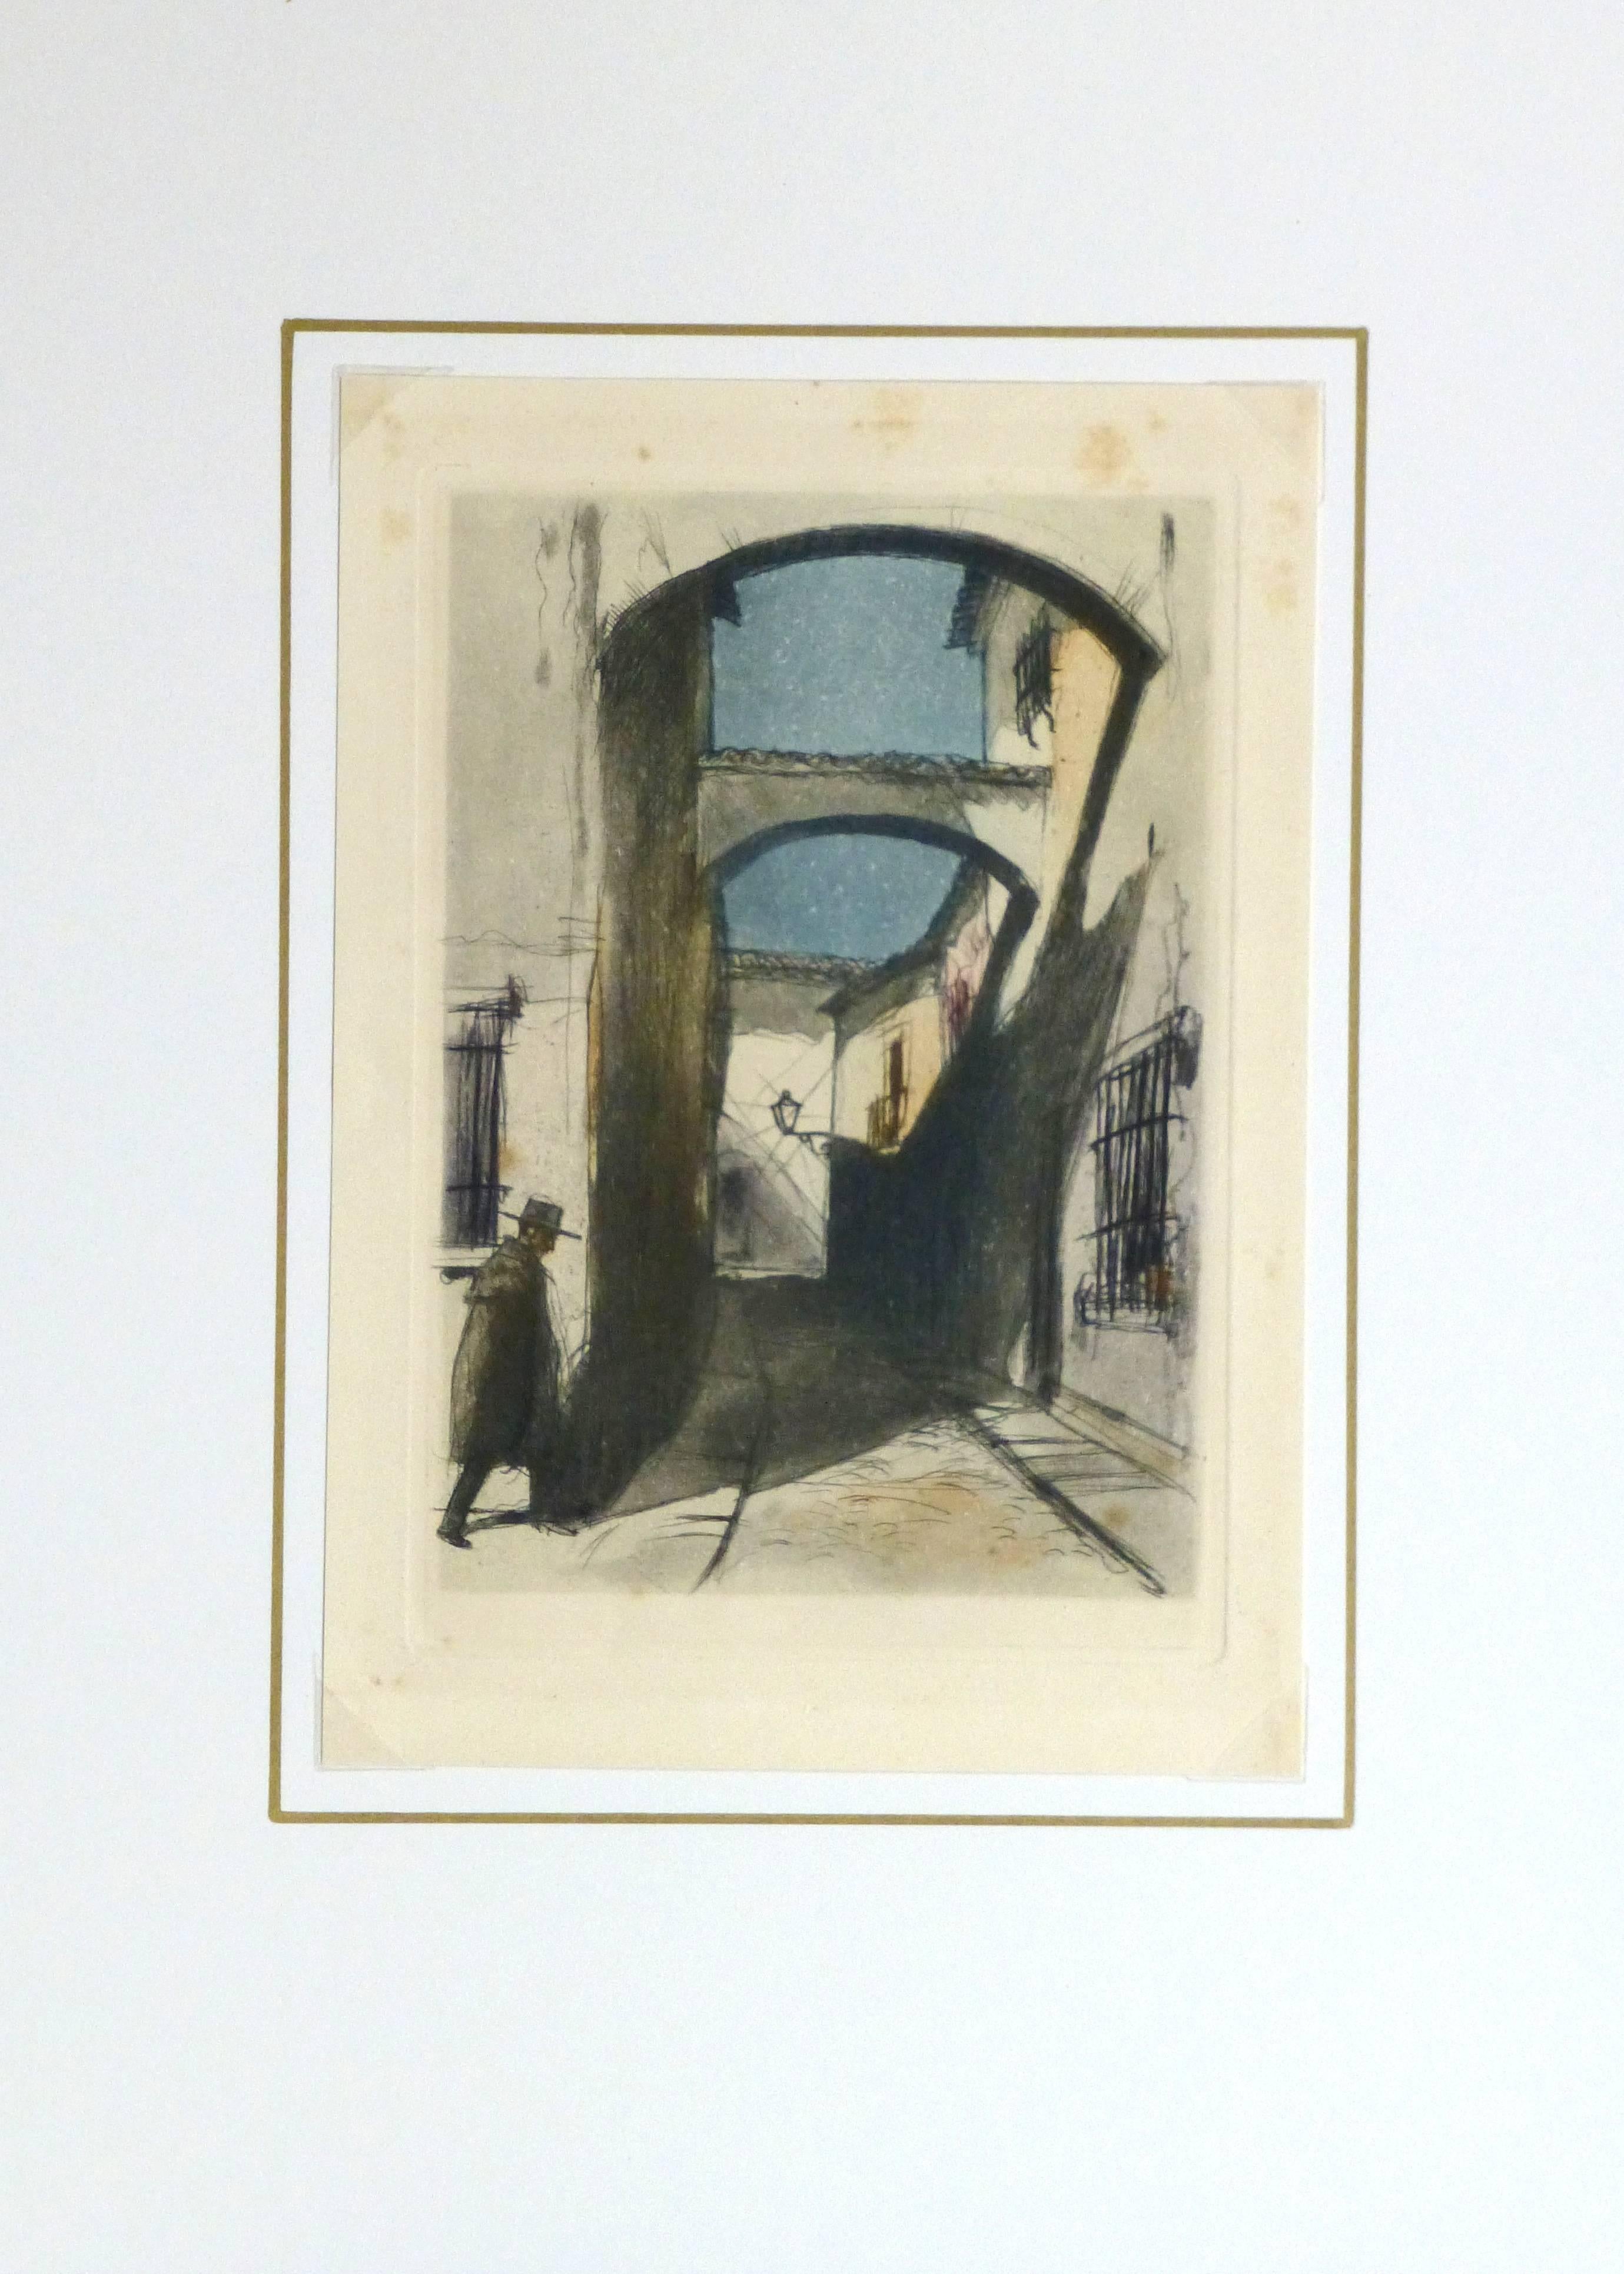 Enchanting French aquatint of a lone figure navigating his way through a quaint Spanish alley, circa 1920.

Original artwork on paper displayed on a white mat with a gold border. Archival plastic sleeve and Certificate of Authenticity included.